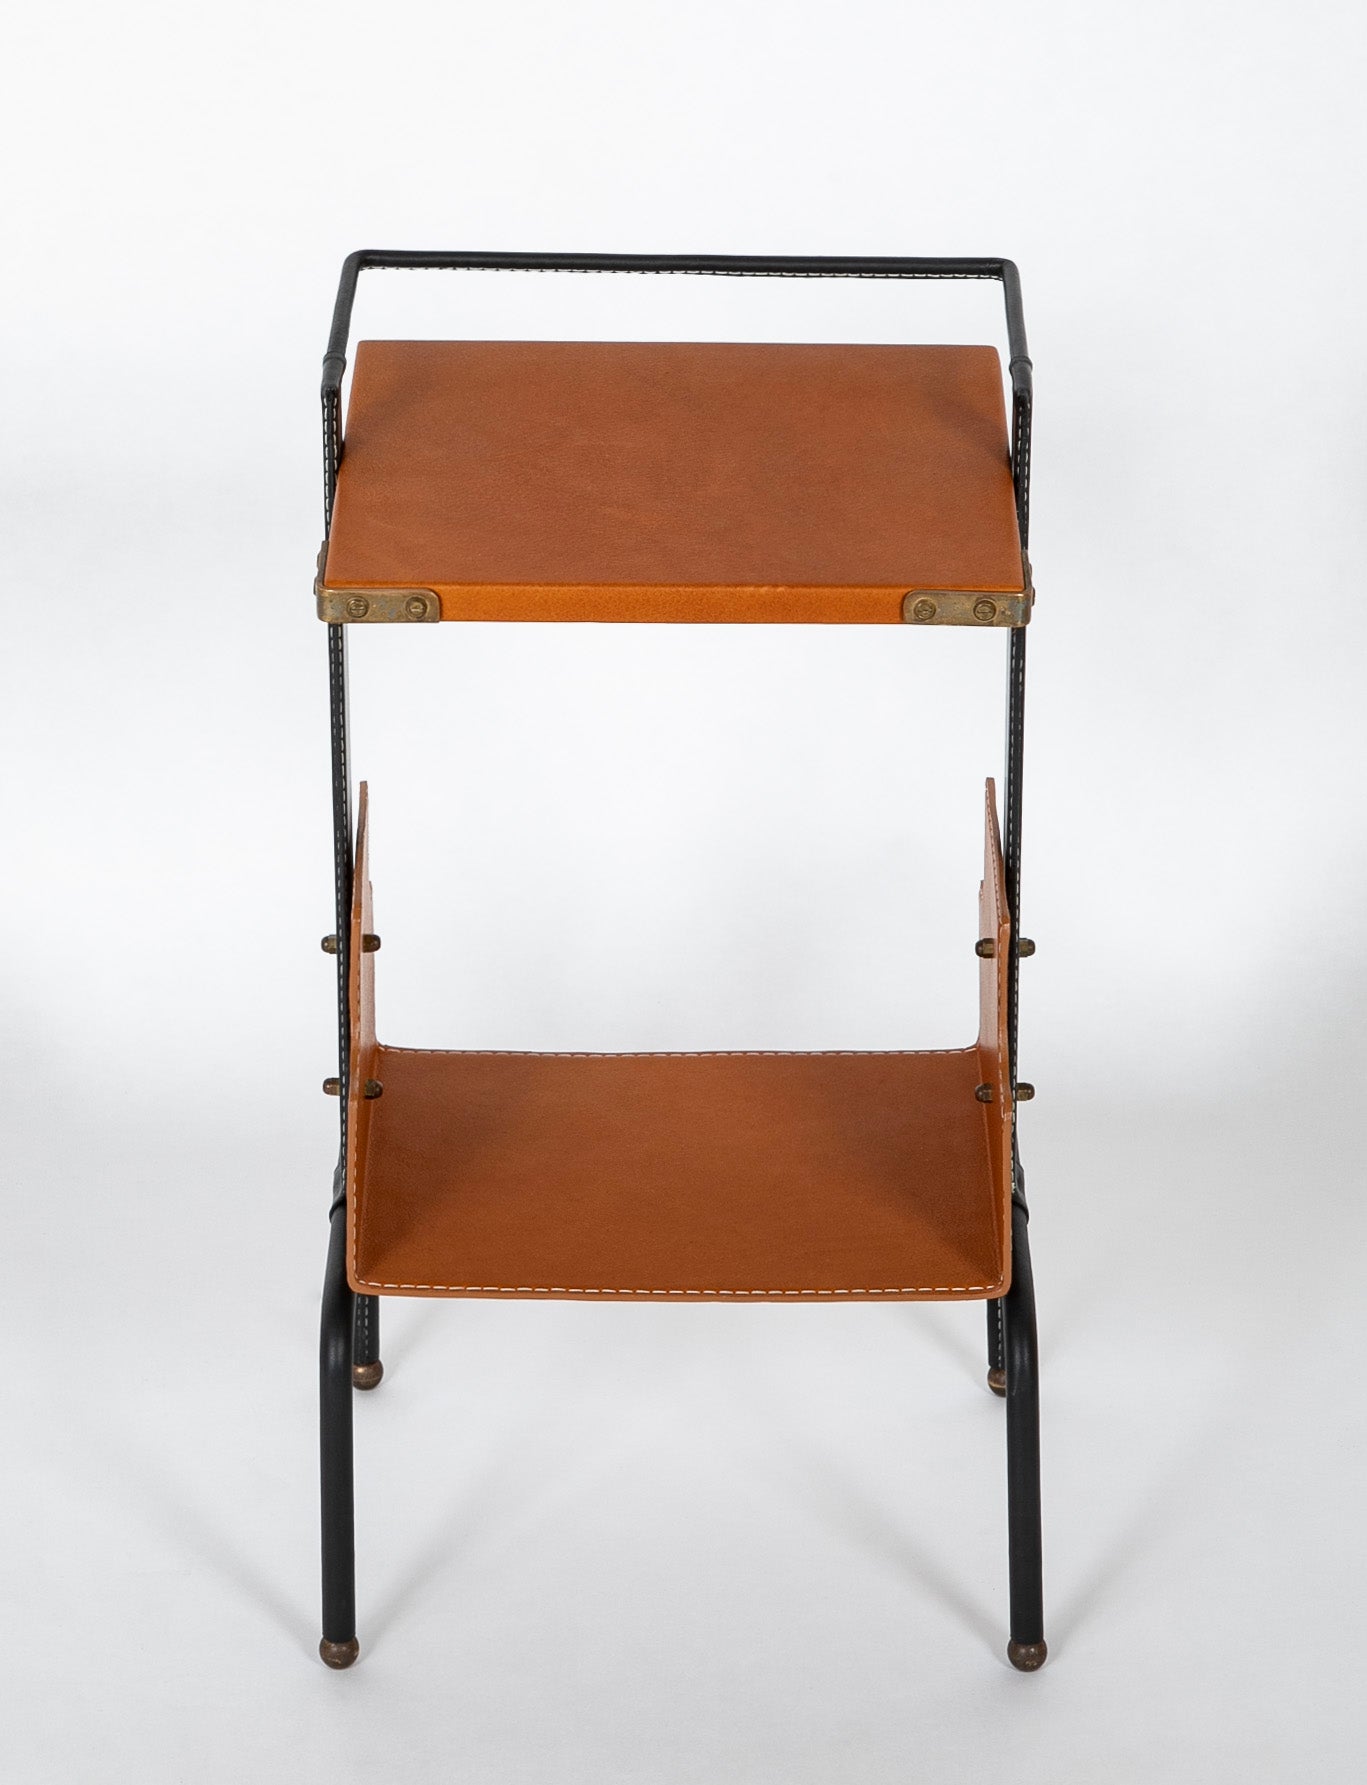 A Jacques Adnet Black and Cognac Leather over Metal Frame Table